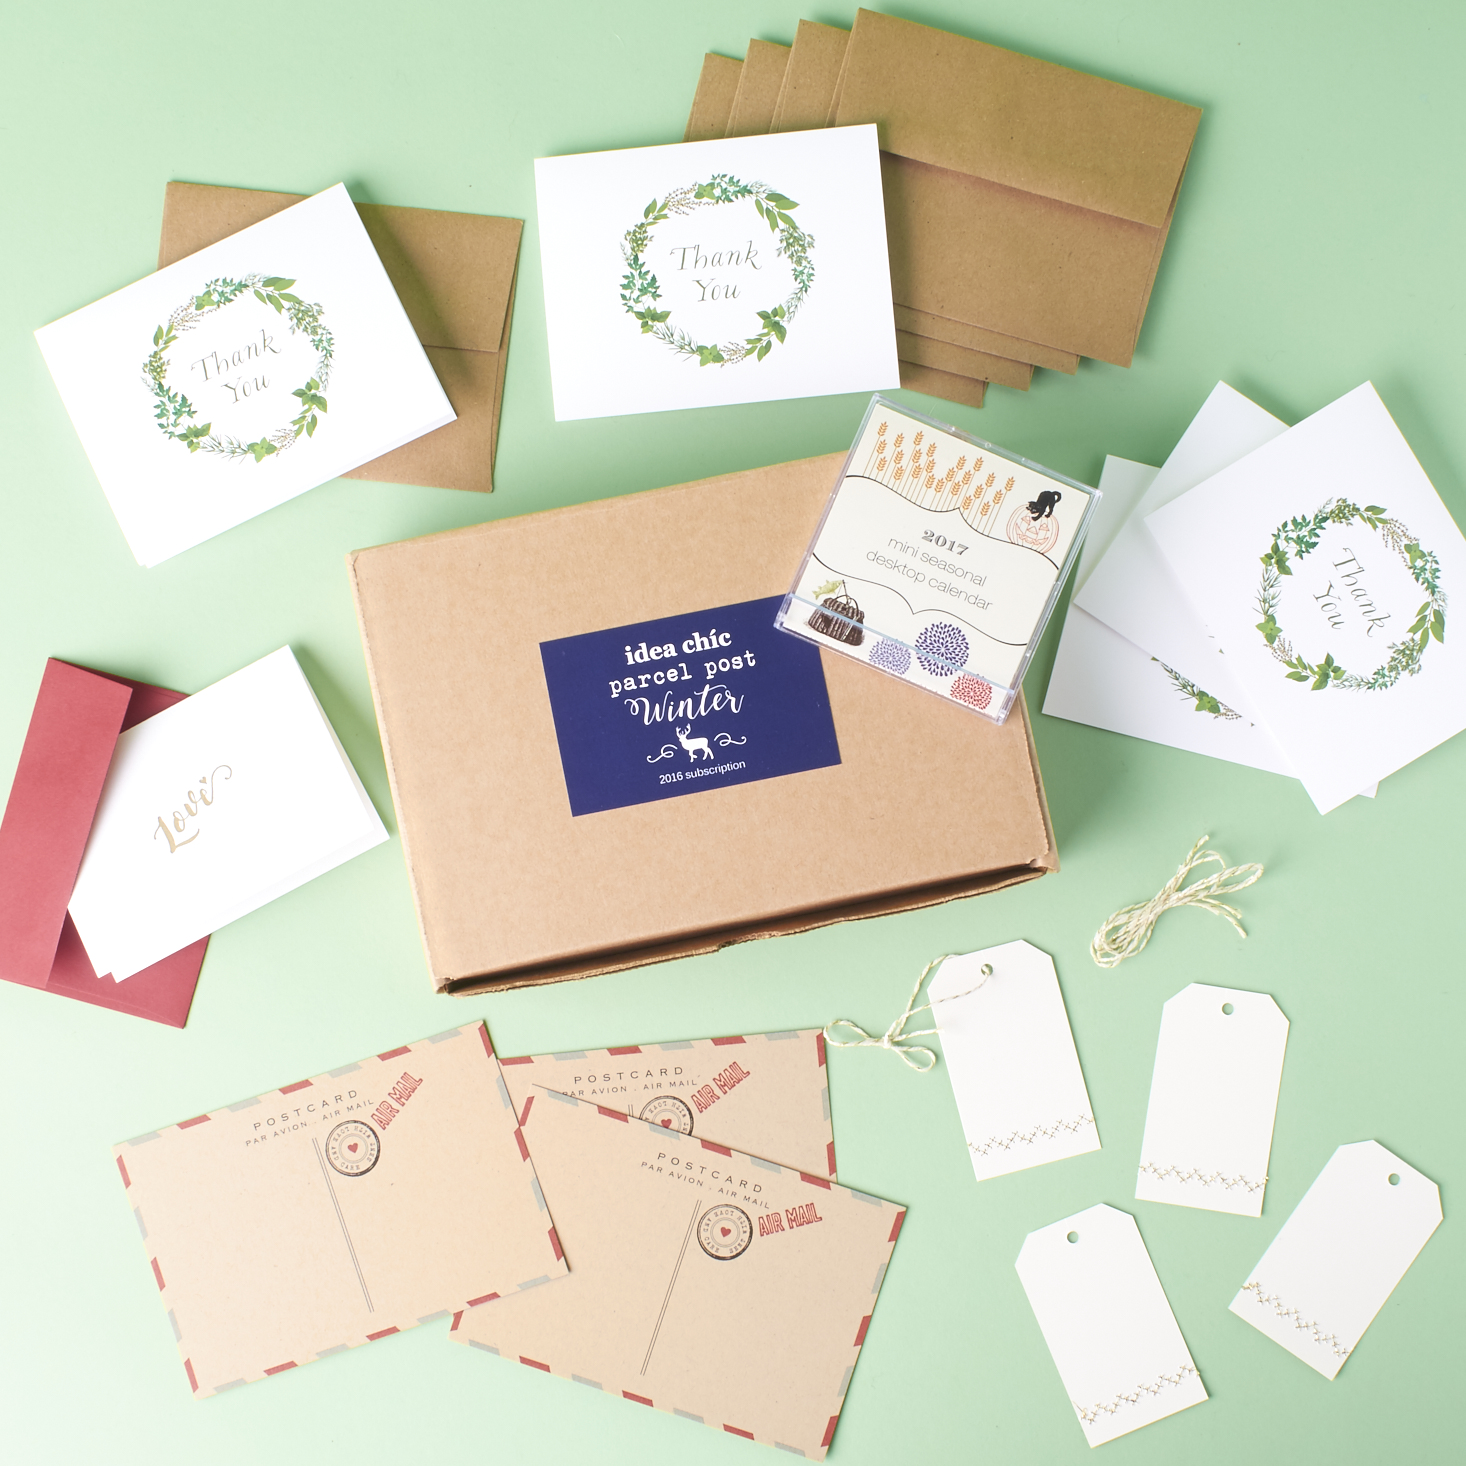 Read our review of the Winter 2016 Parcel Post box by Idea Chic!